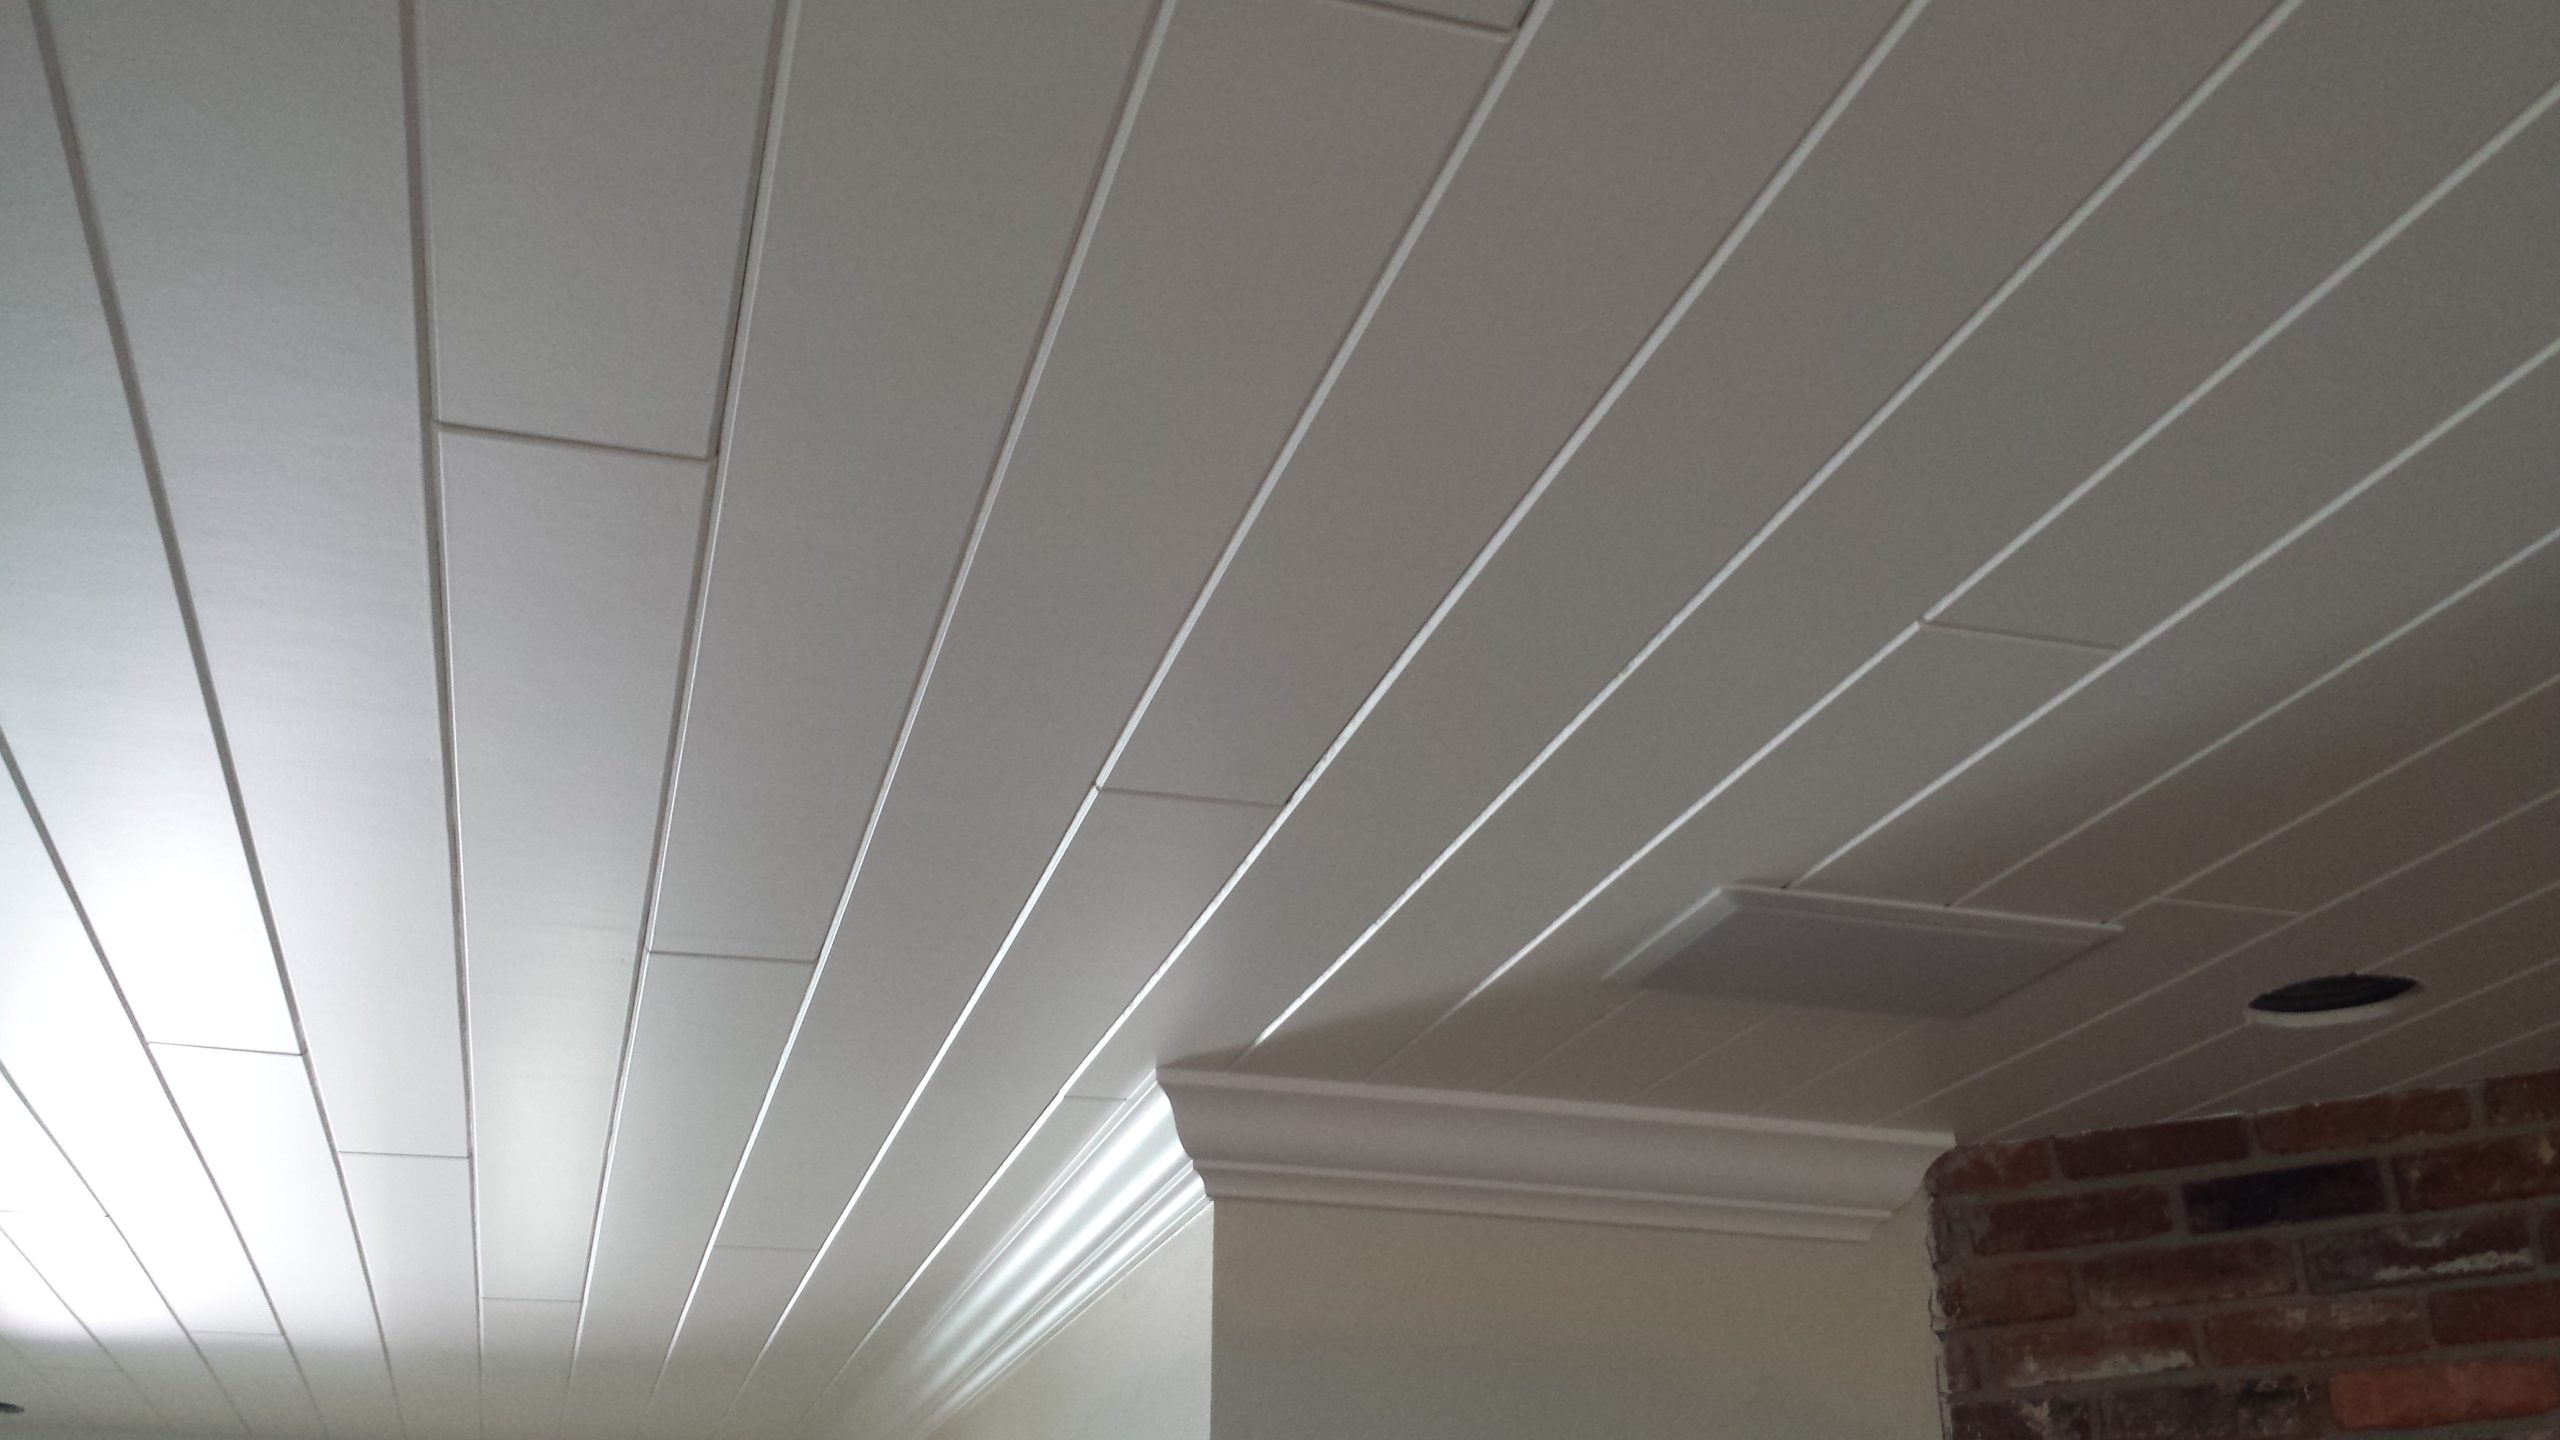 Plank work on a white ceiling of a house